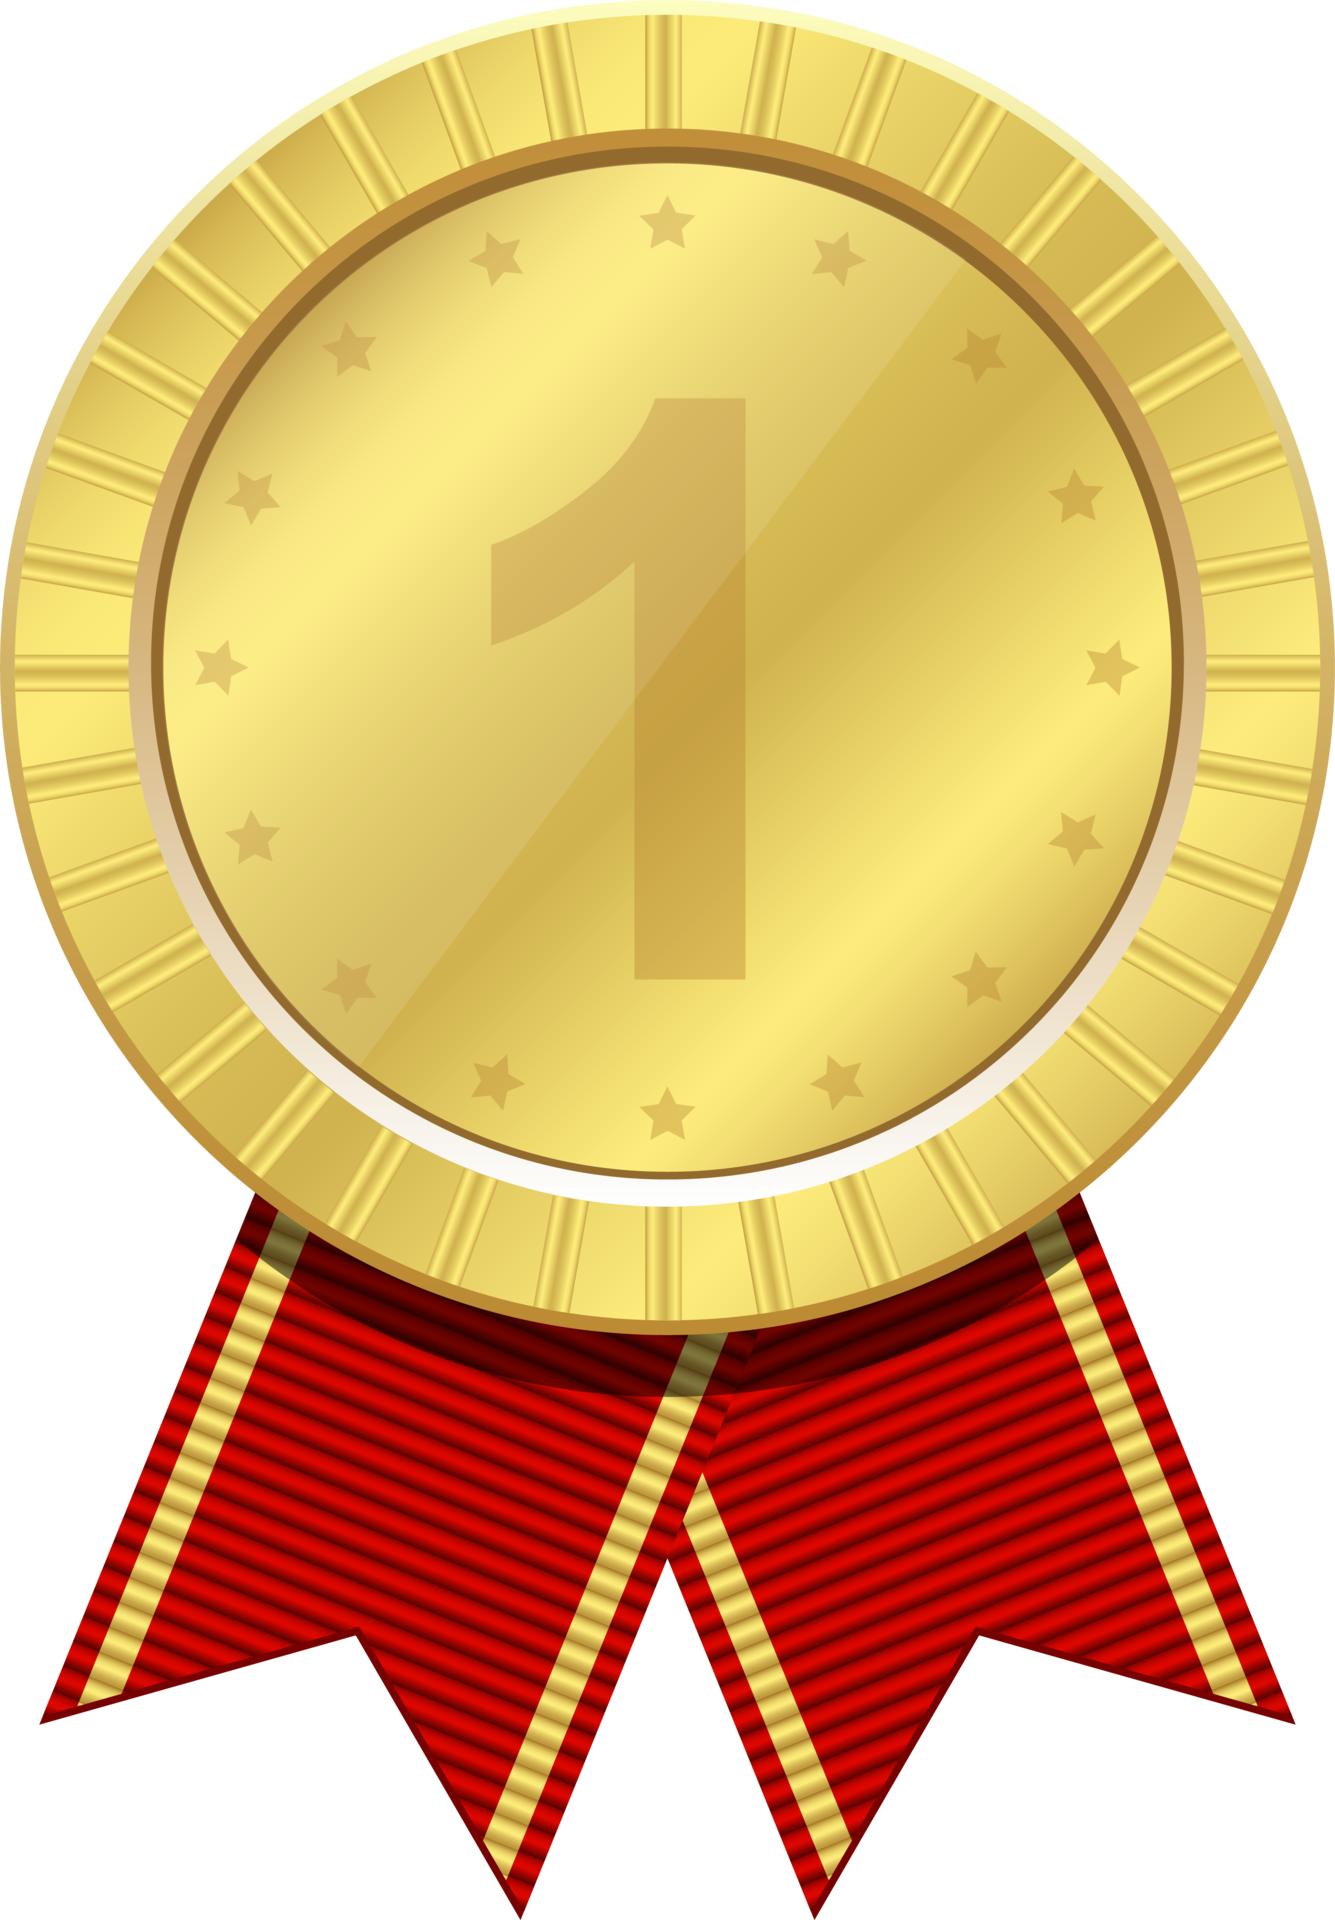 First Place Medal Pngs For Free Download